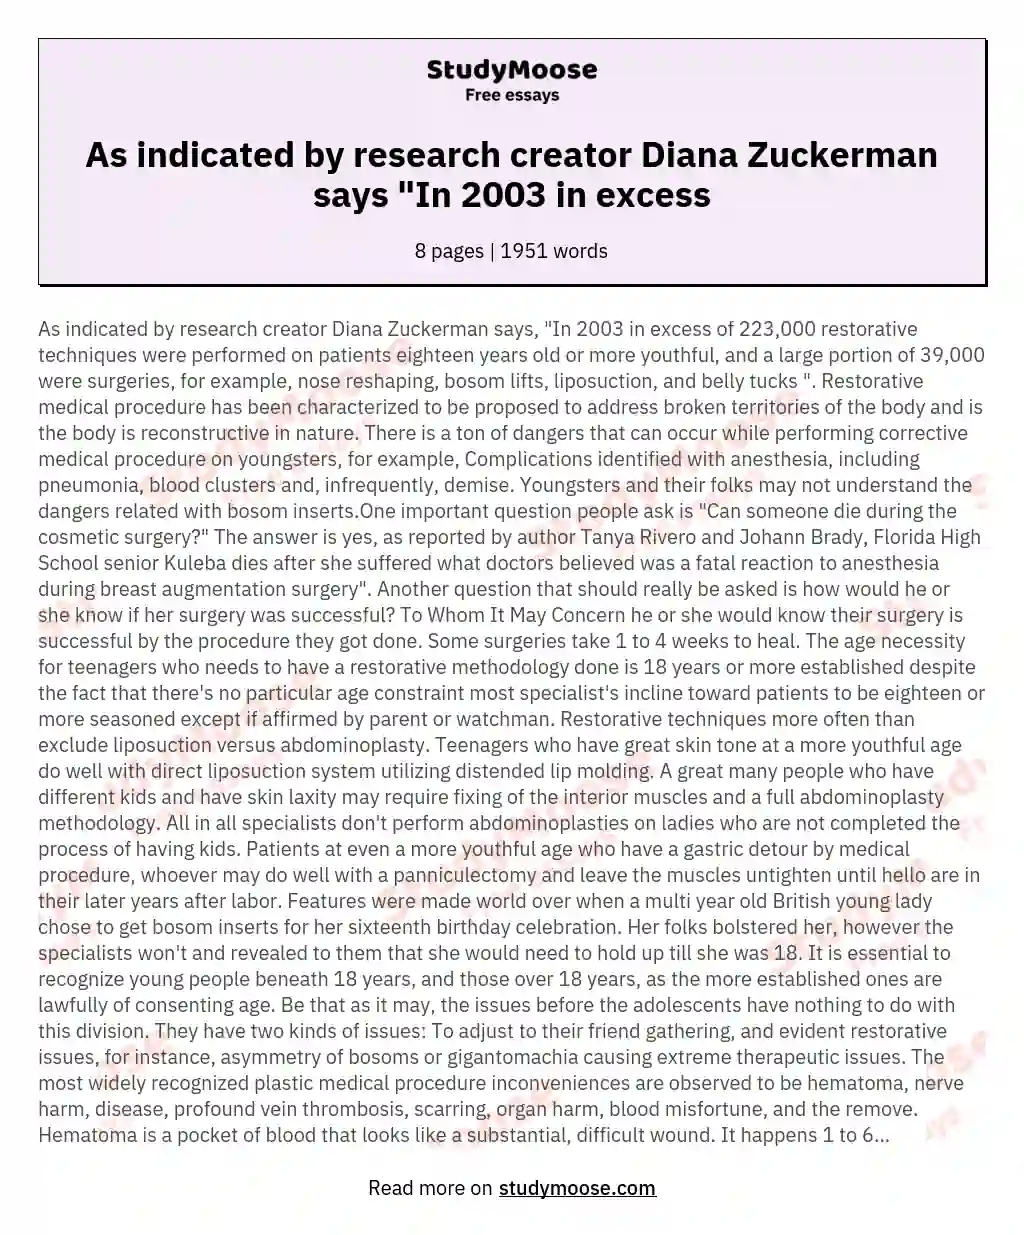 As indicated by research creator Diana Zuckerman says "In 2003 in excess